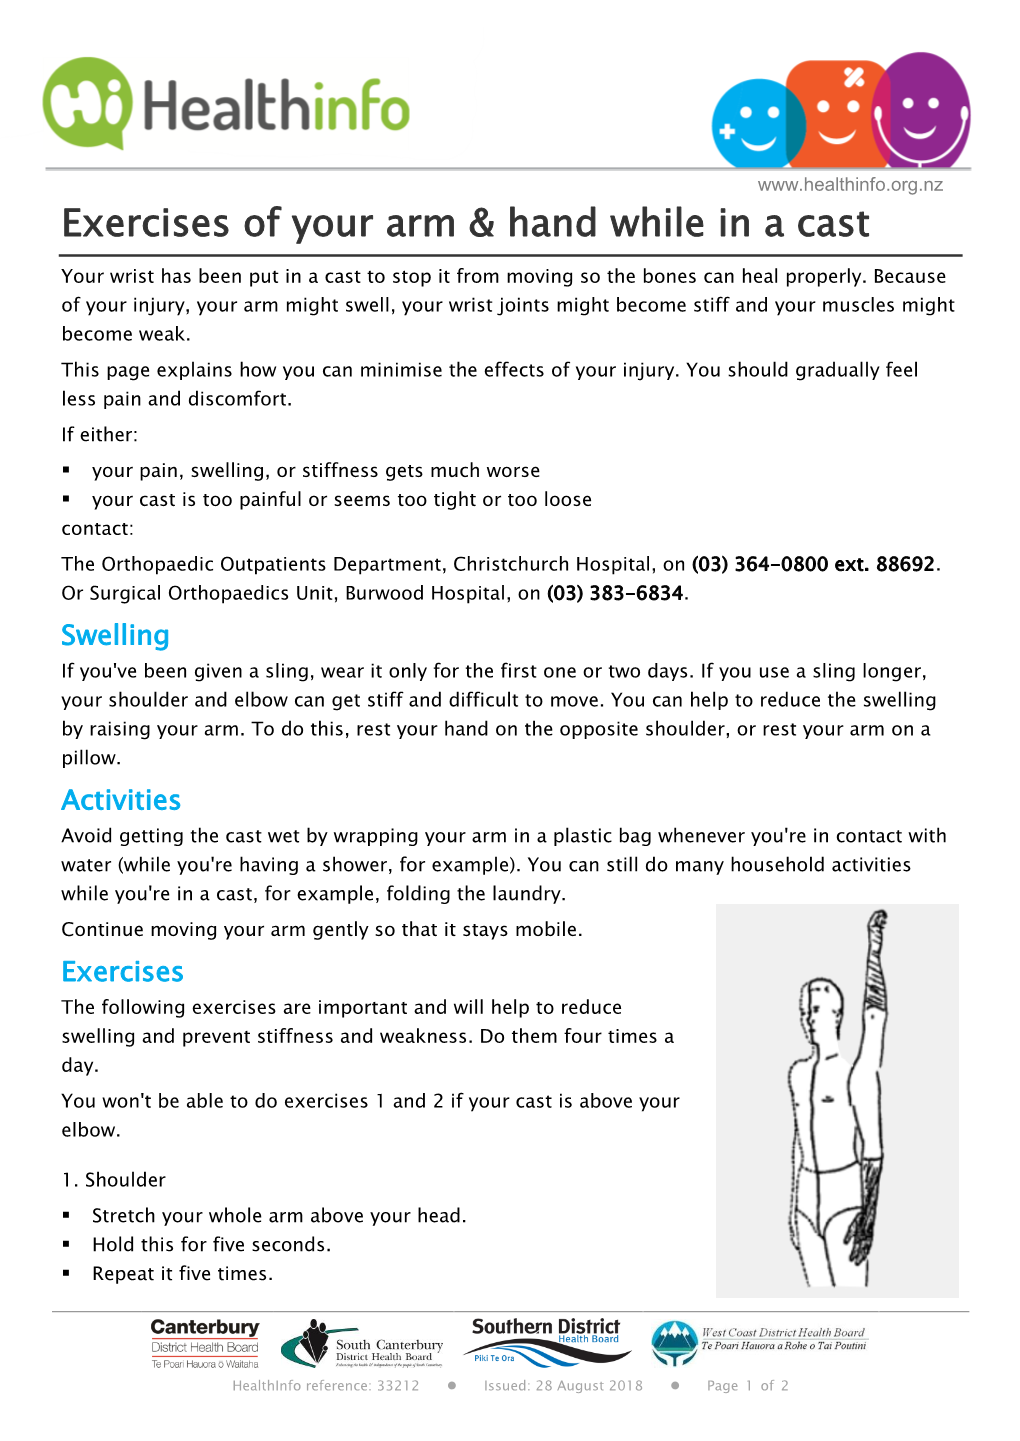 Exercises of Your Arm & Hand While in a Cast